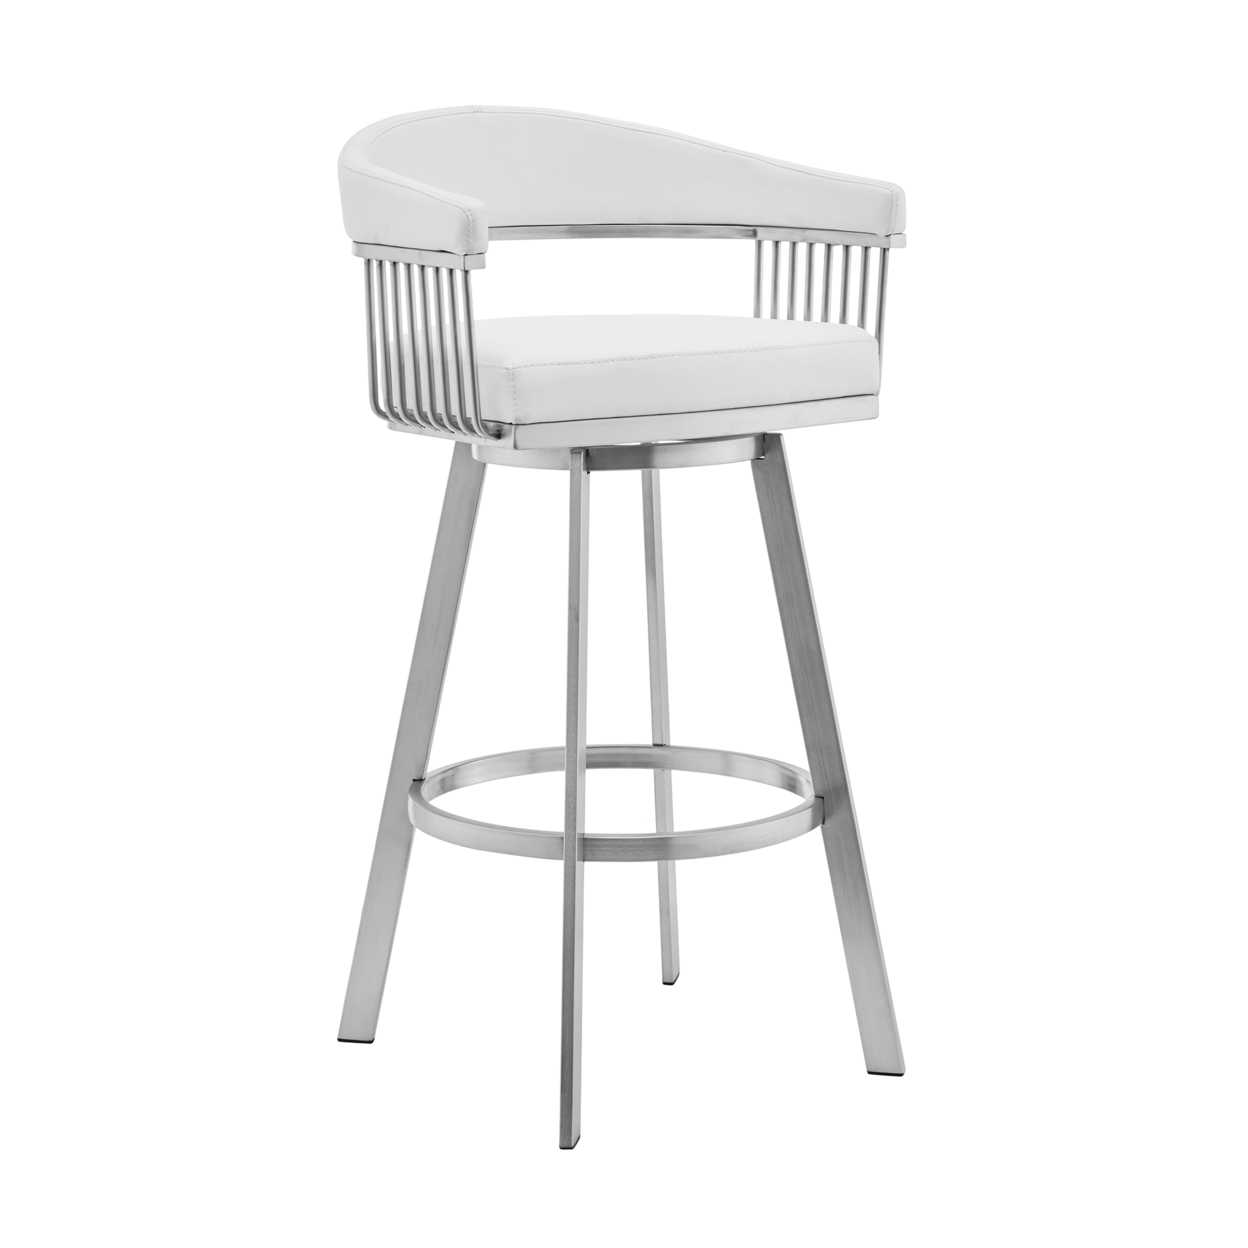 Swivel Barstool With Open Design Metal Frame And Slatted Arms, White And Silver- Saltoro Sherpi